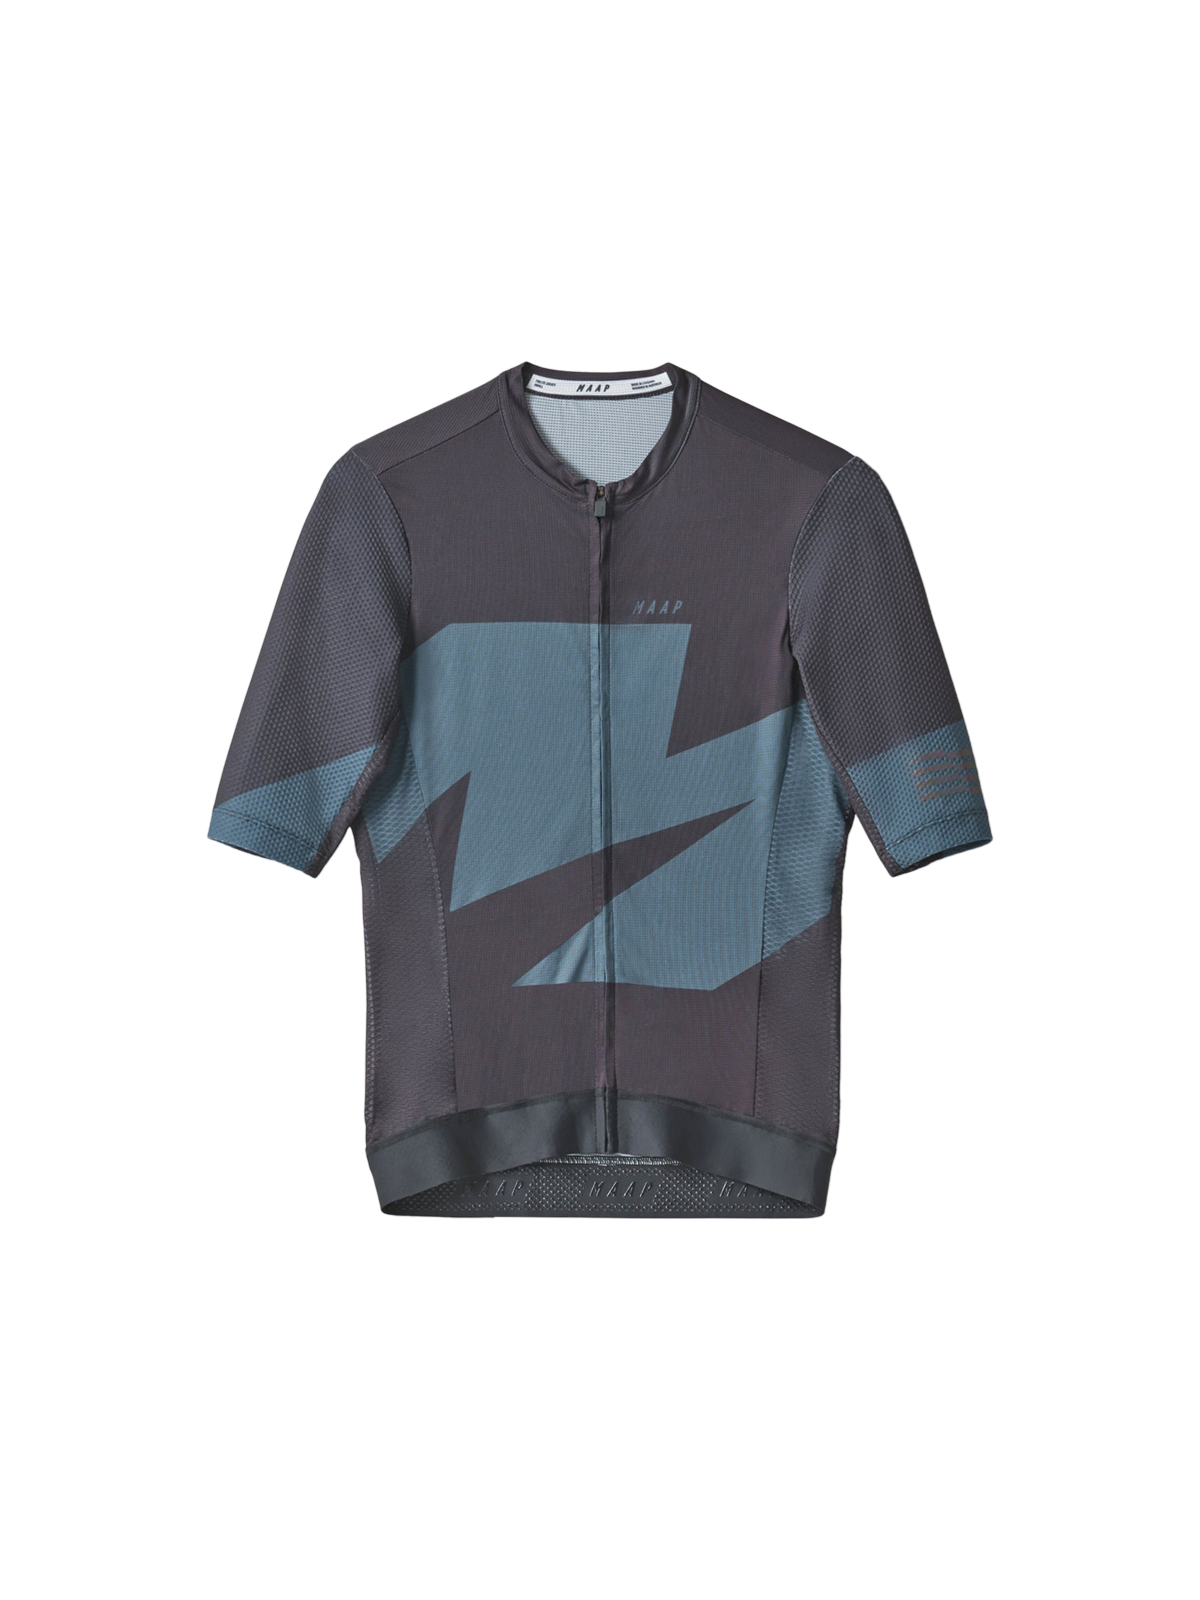 Evolve Pro Air Jersey - MAAP Cycling Apparel